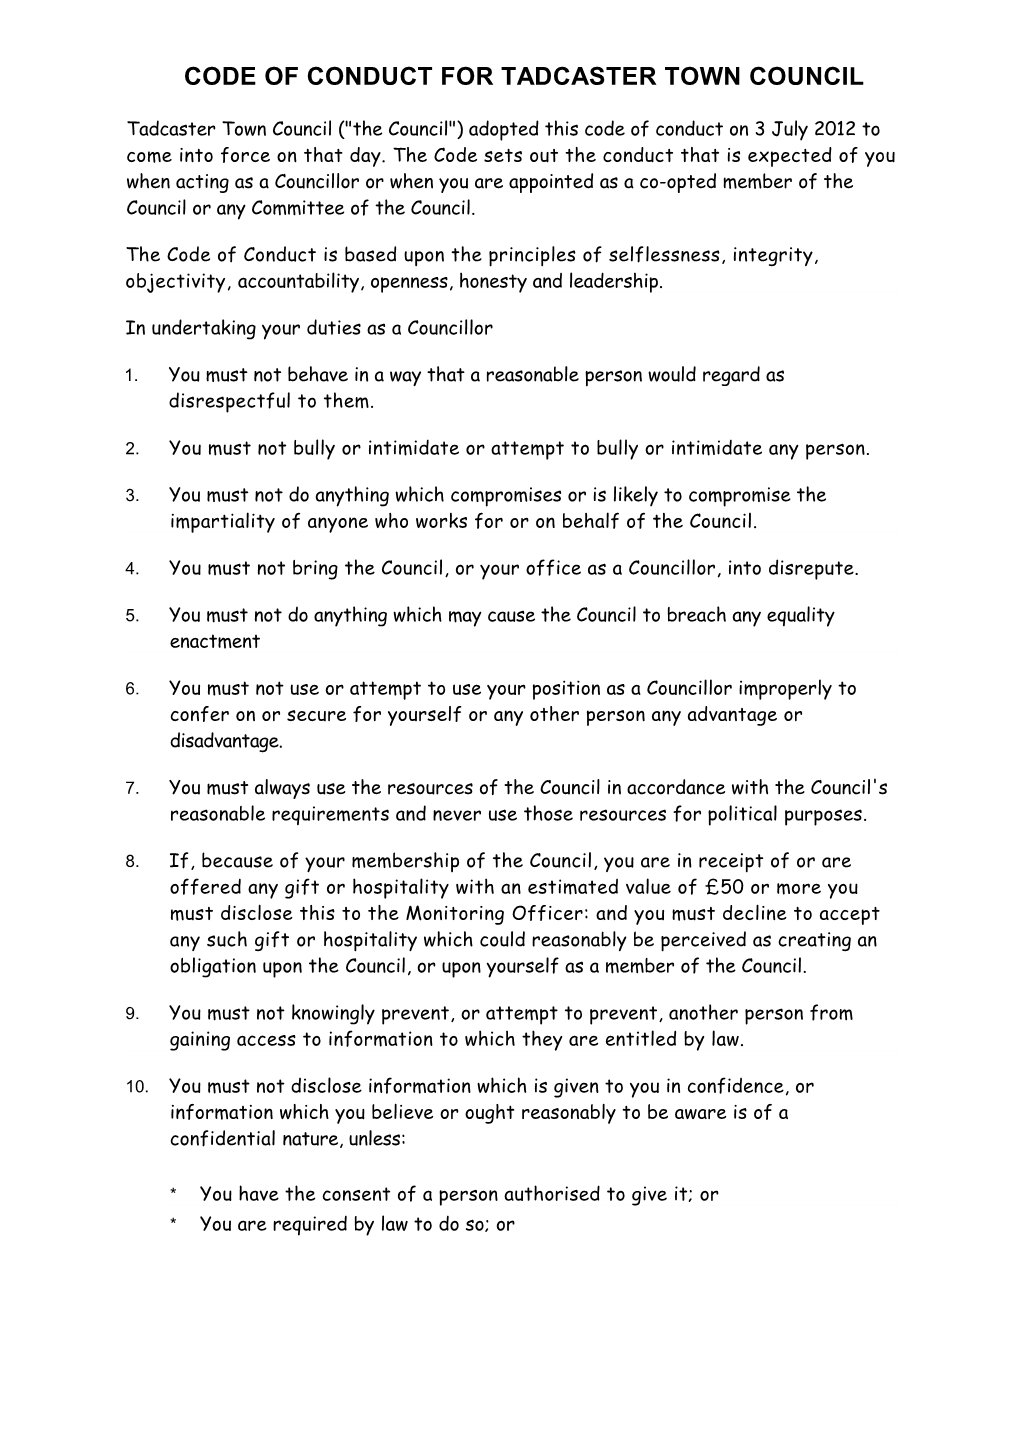 Code of Conduct for Tadcaster Town Council